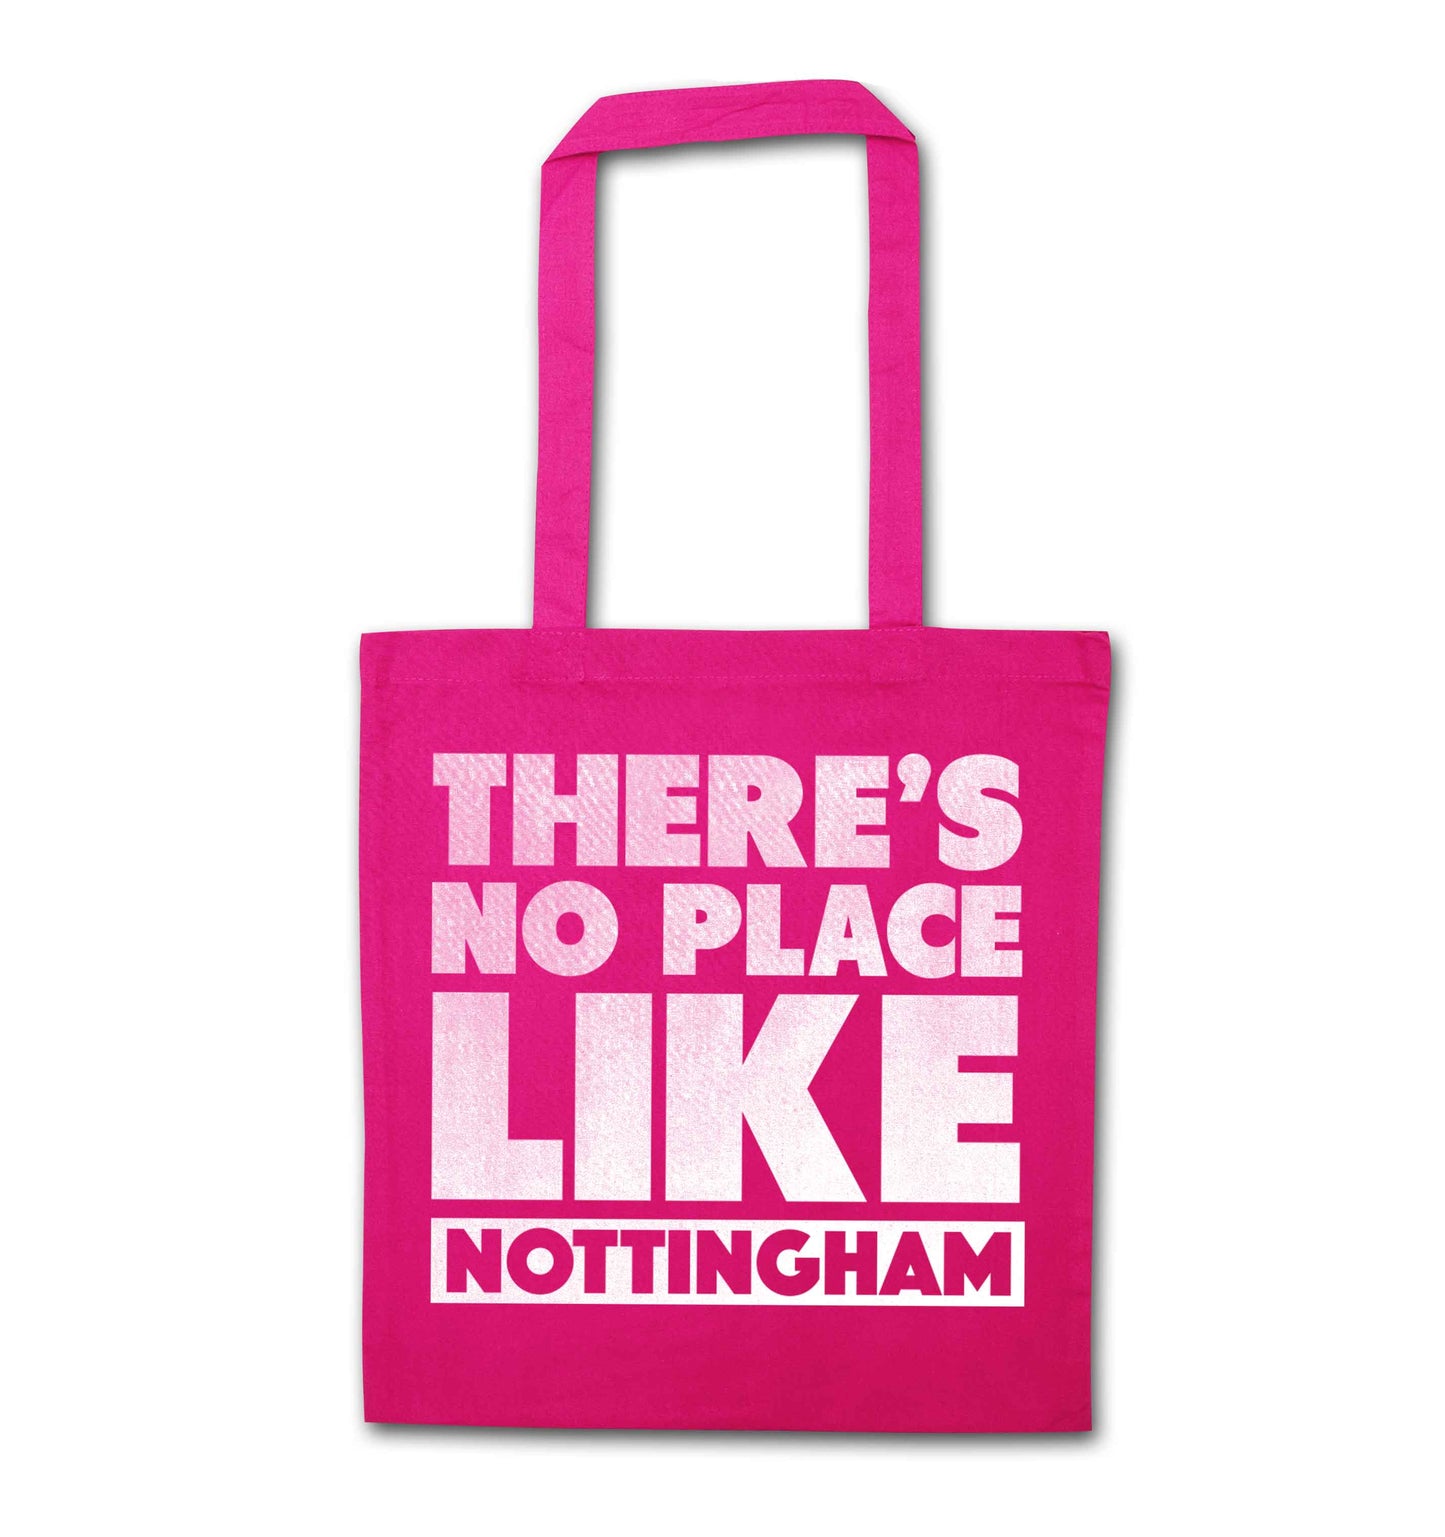 There's no place like Nottingham pink tote bag